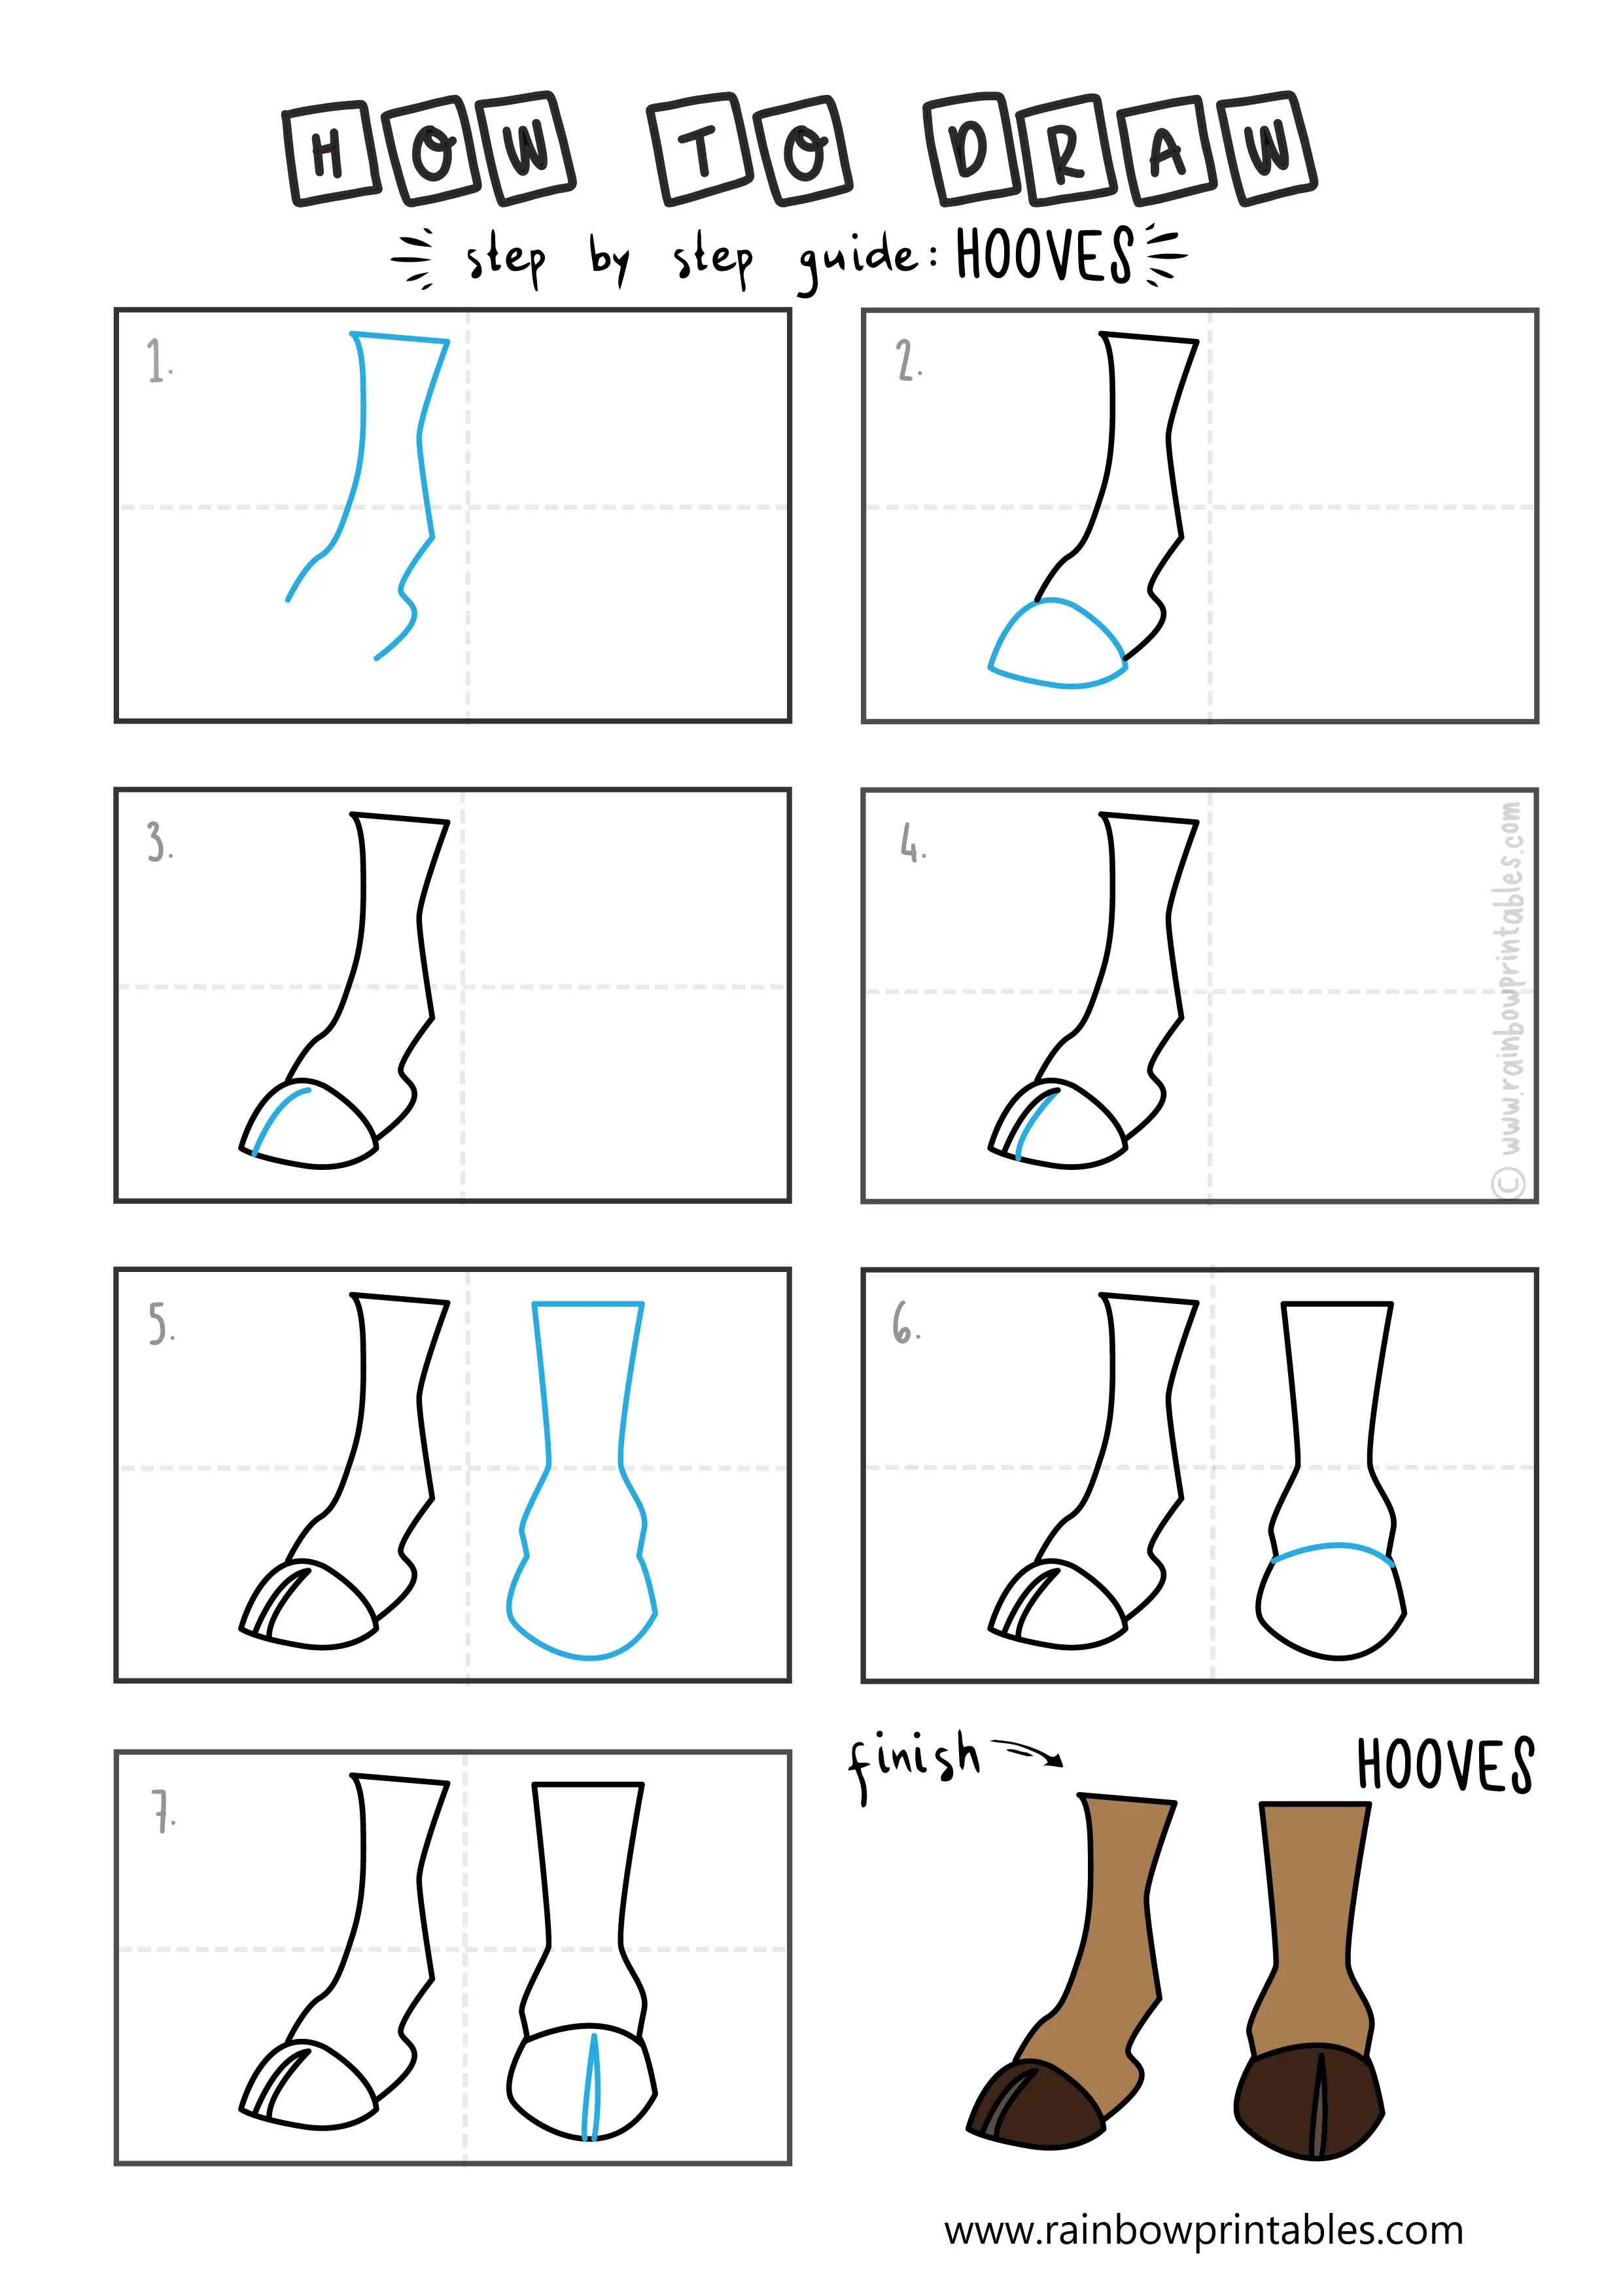 HOW TO DRAW ANIMAL HOOVES LEGS COW CAMEL HORSE FEET ILLUSTRATION STEP BY STEP EASY SIMPLE FOR KIDS